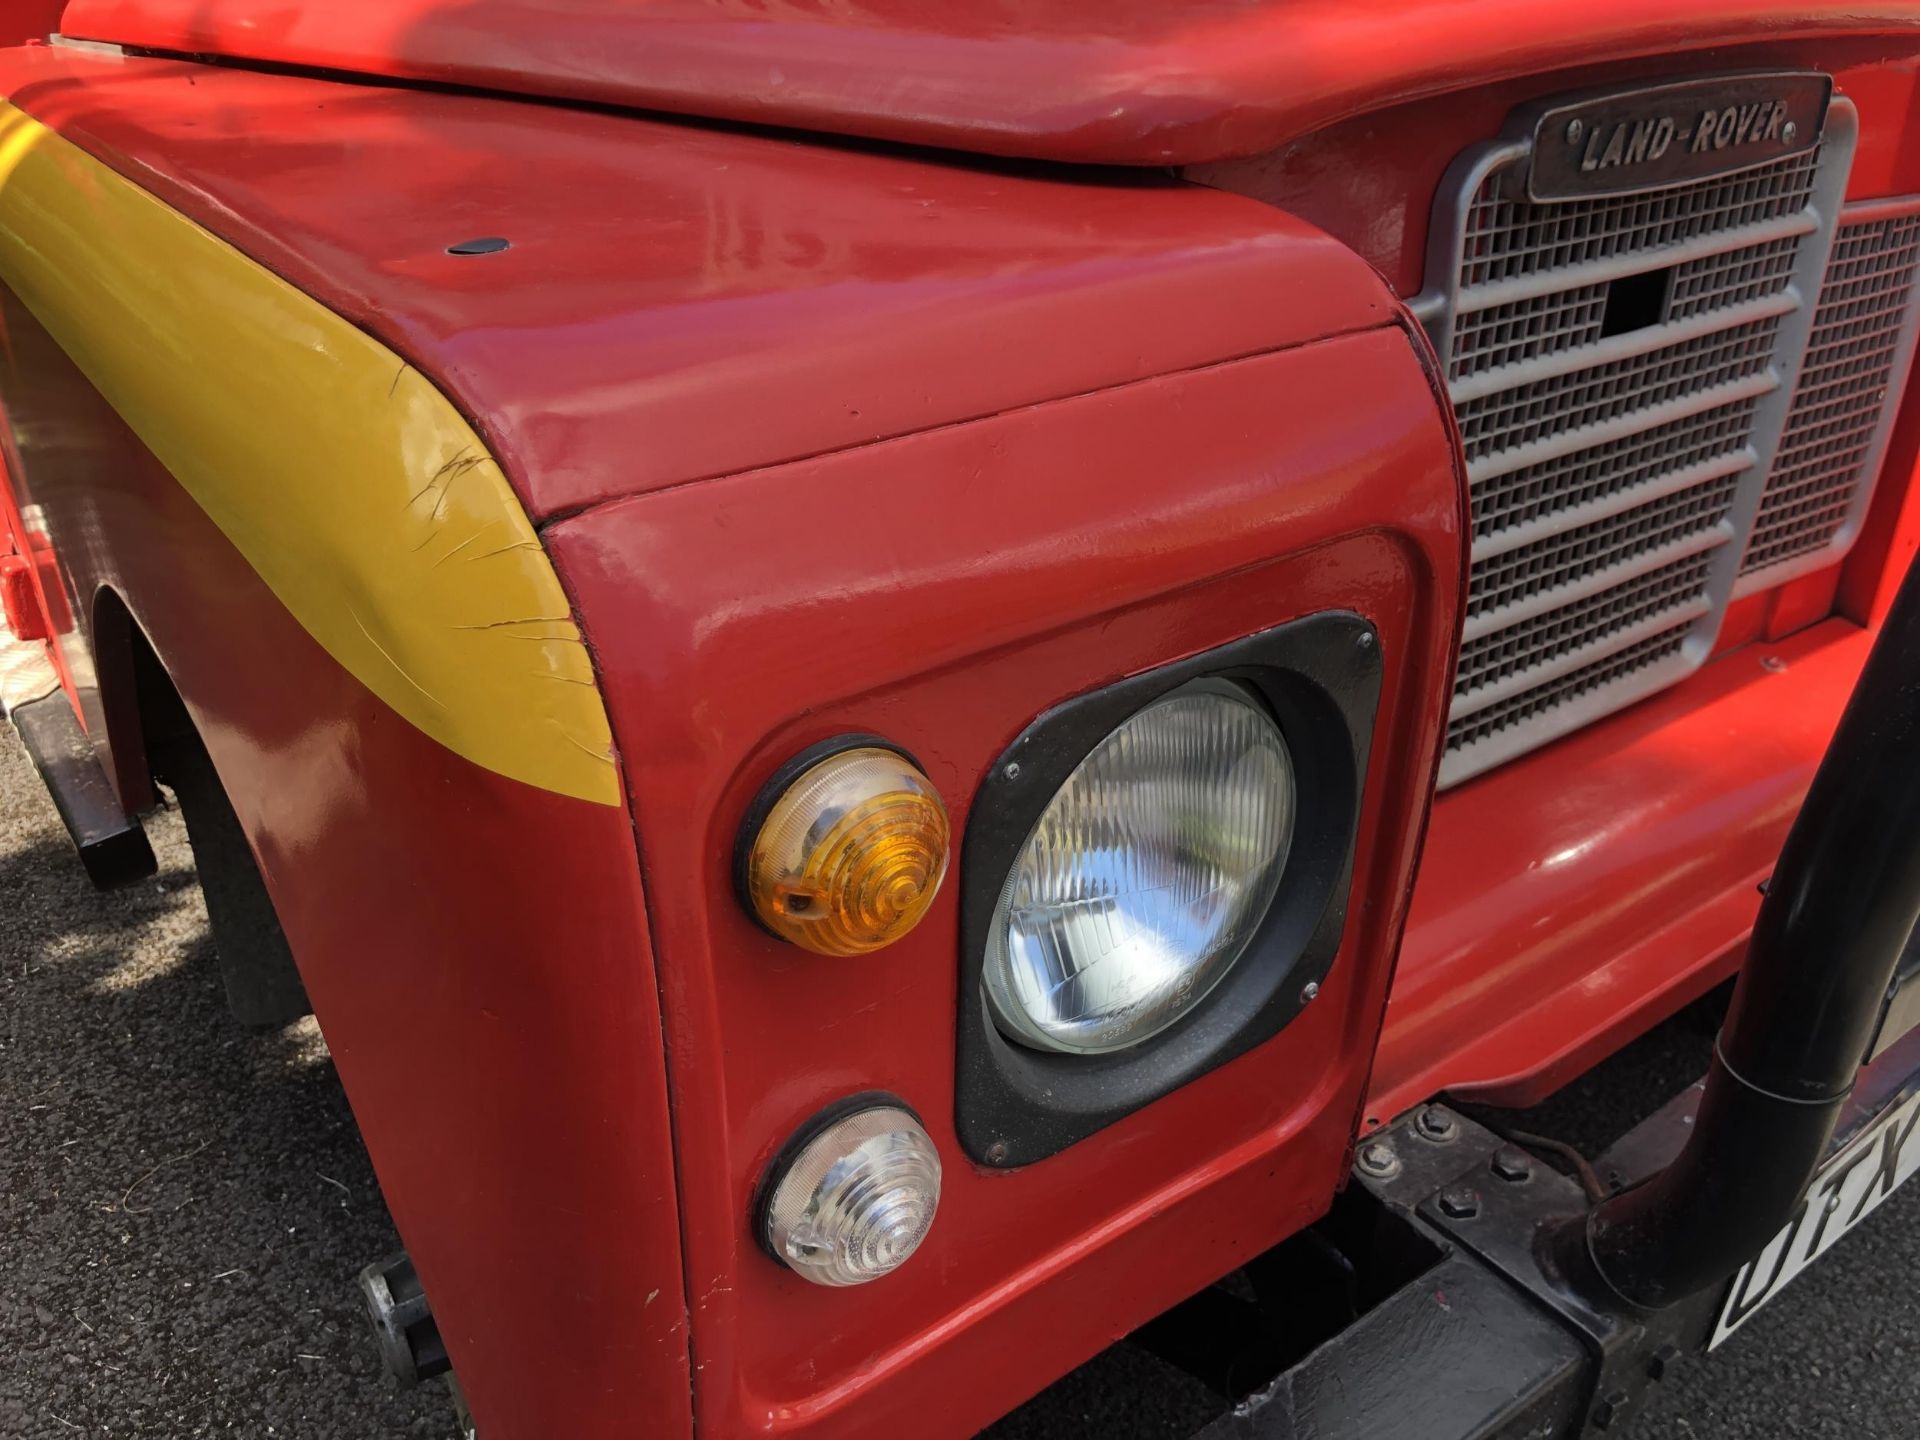 1977 Land Rover 88 Series III Royal Mail Recovery Vehicle Registration number OTX 545R Chassis - Image 28 of 67